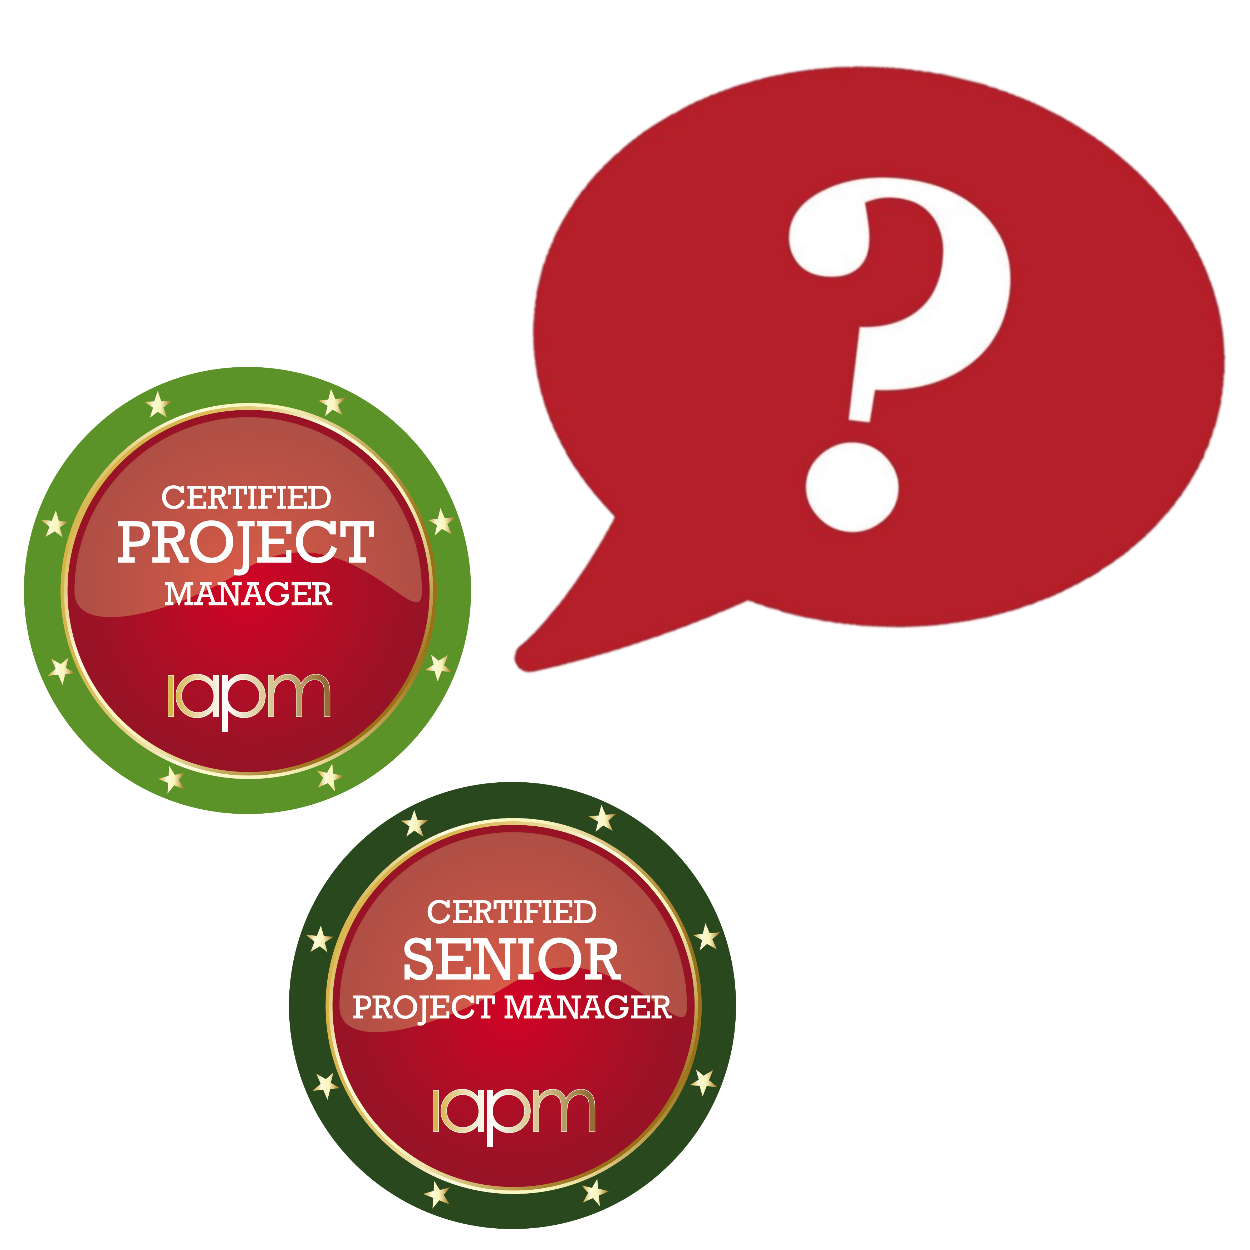 The badge of the 'Certified Project Manager (IAPM)' and 'Certified Senior Project Manager (IAPM)' with a question mark bubble.